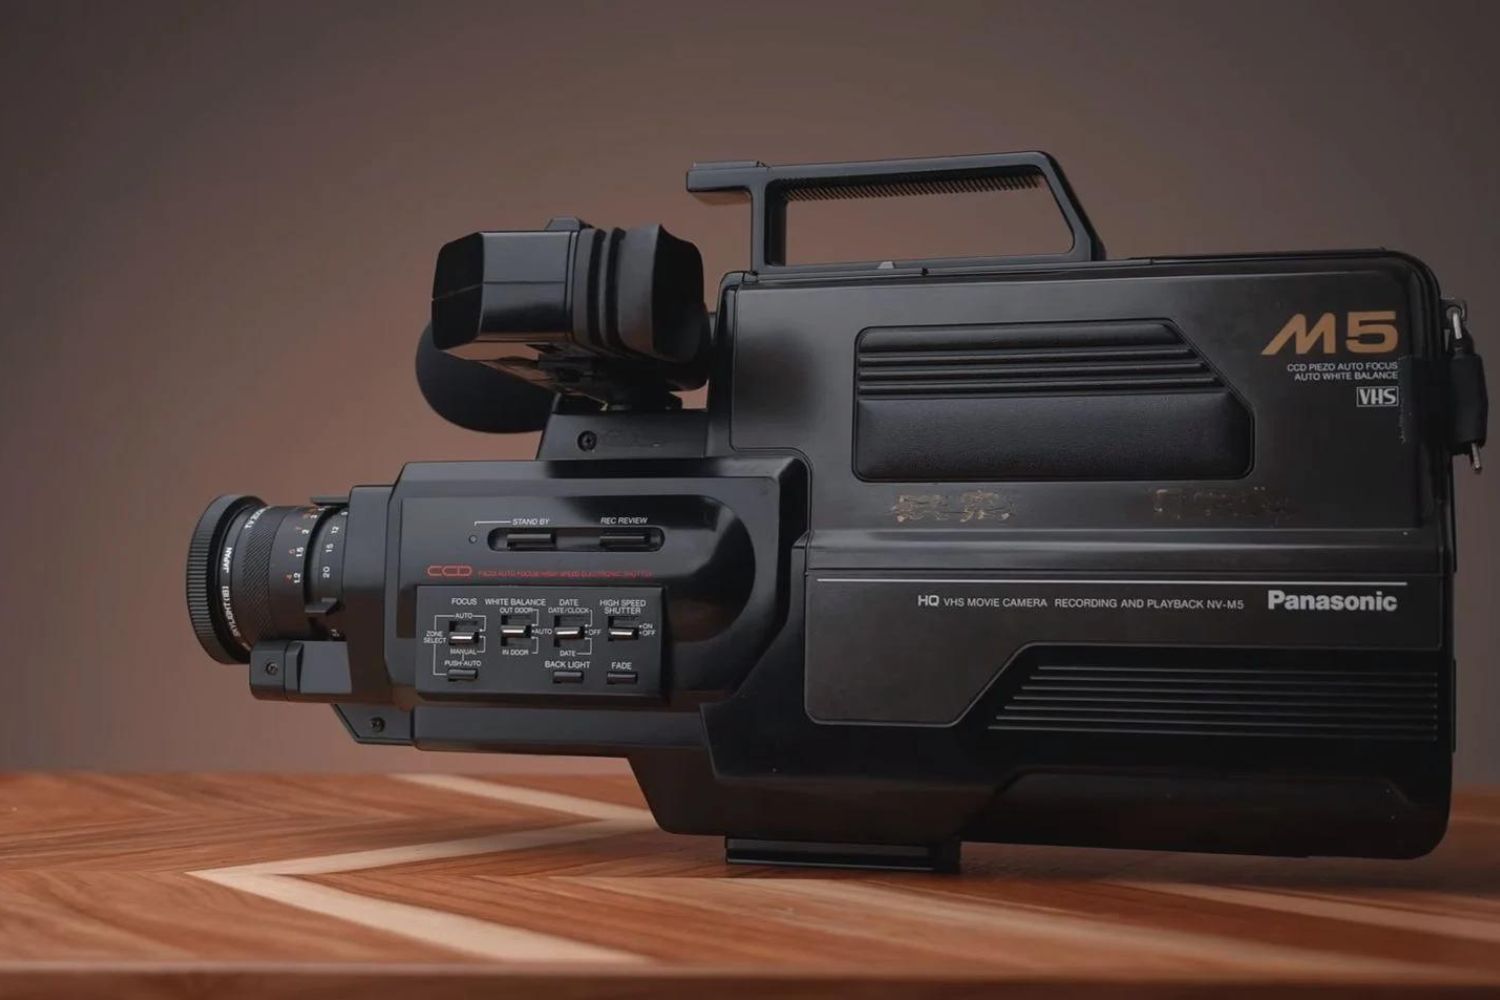 What Can I Do With An Old Camcorder